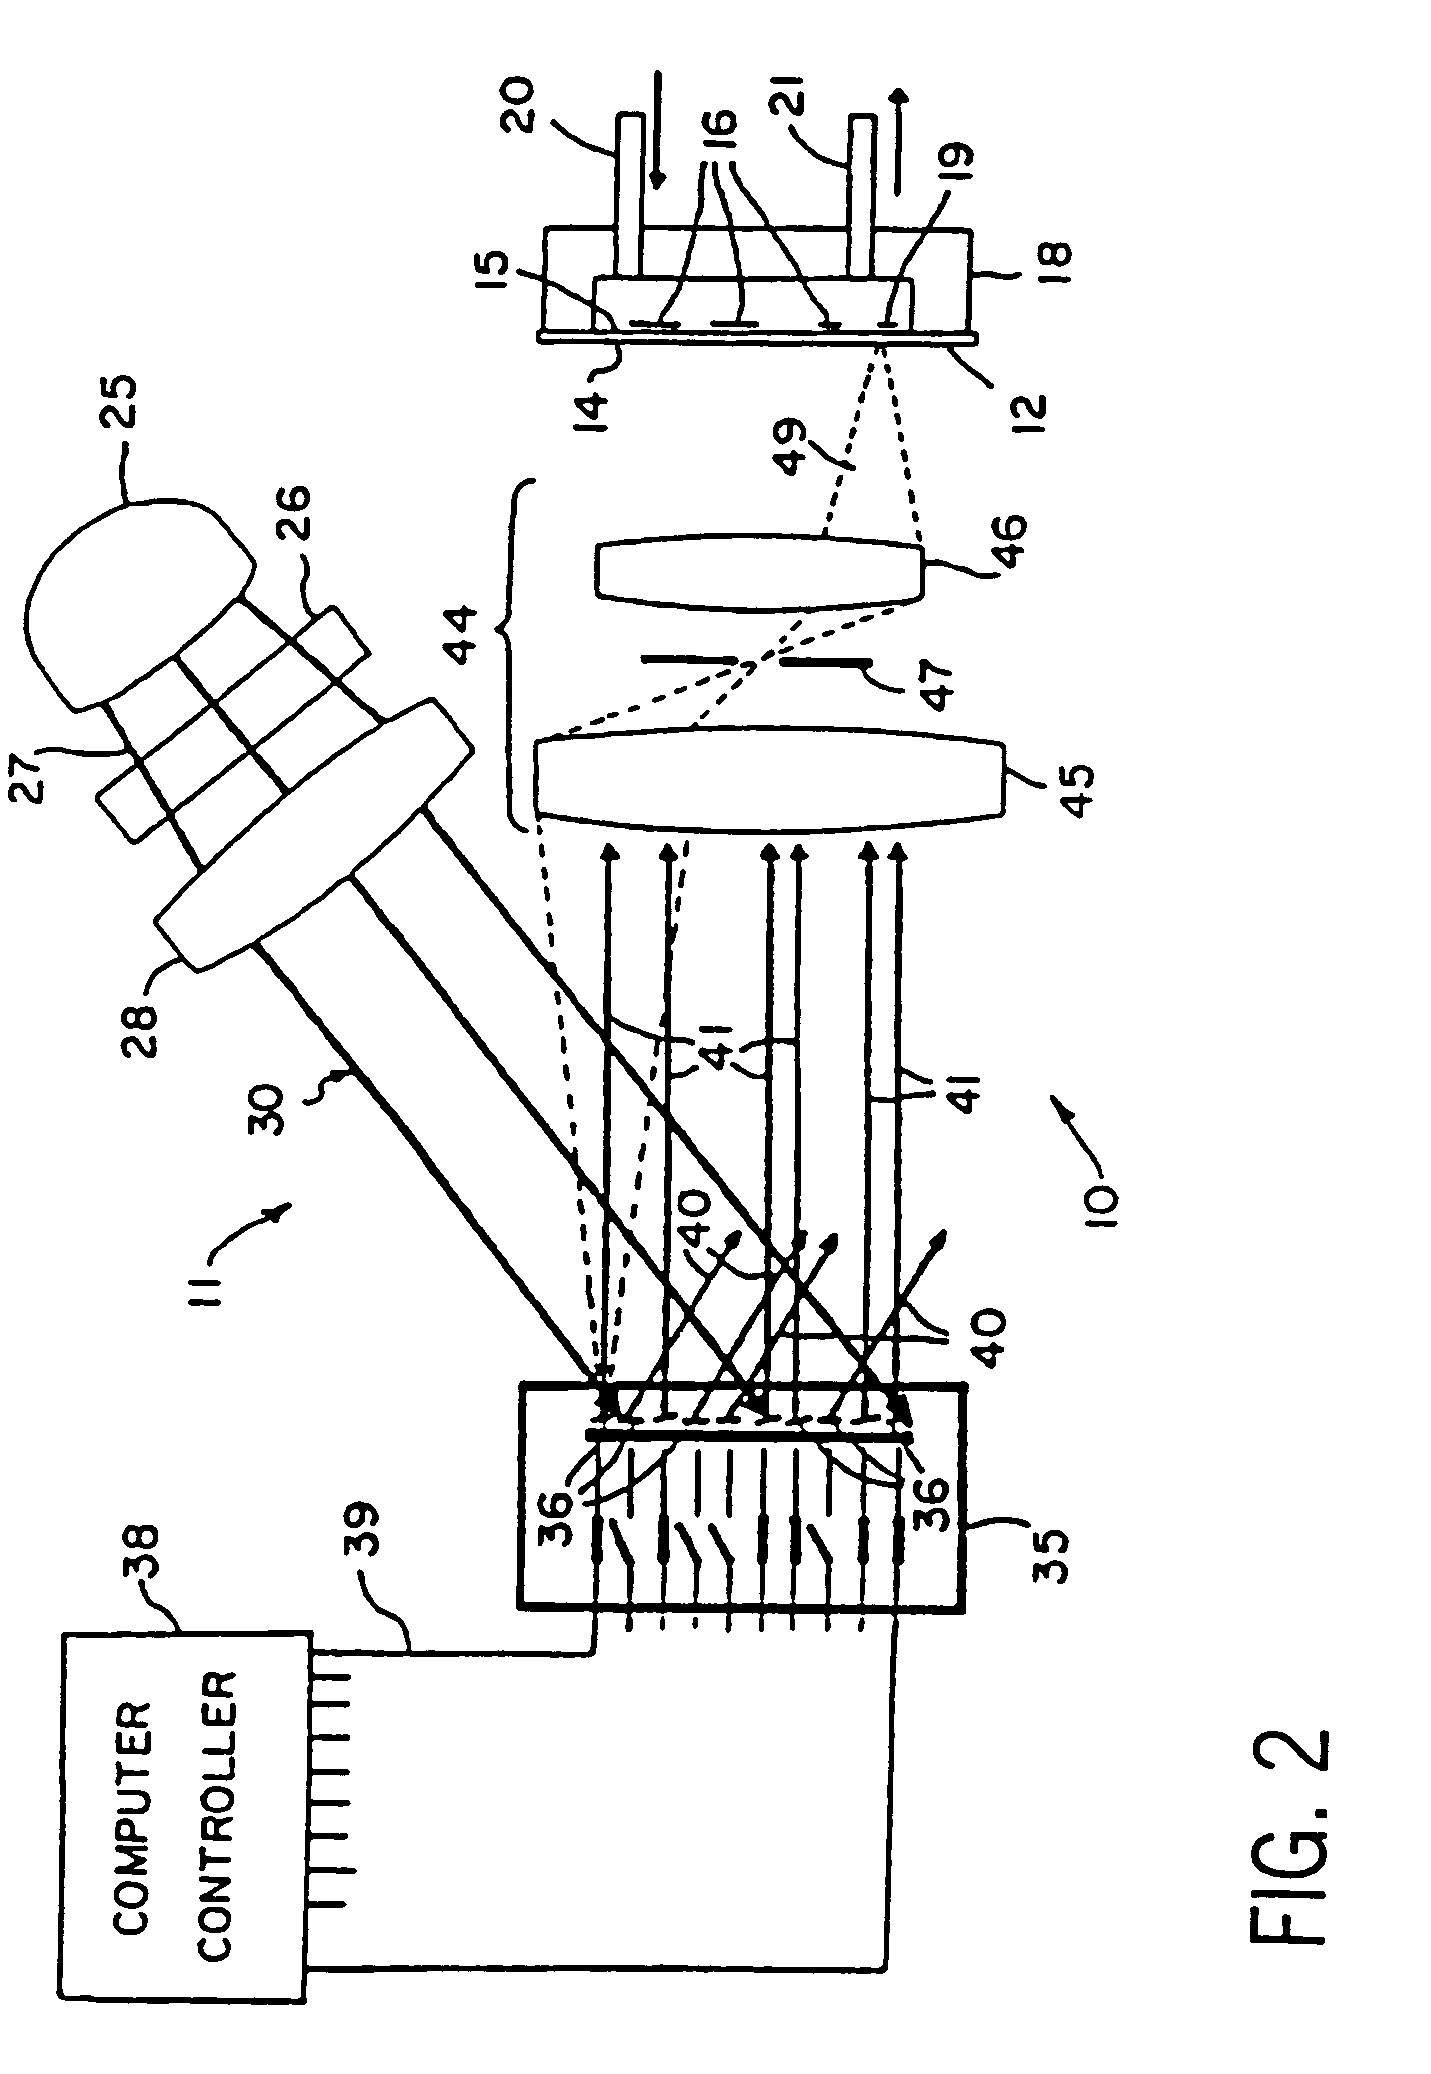 Apparatus for constructing DNA probes having a prismatic and kaleidoscopic light homogenizer